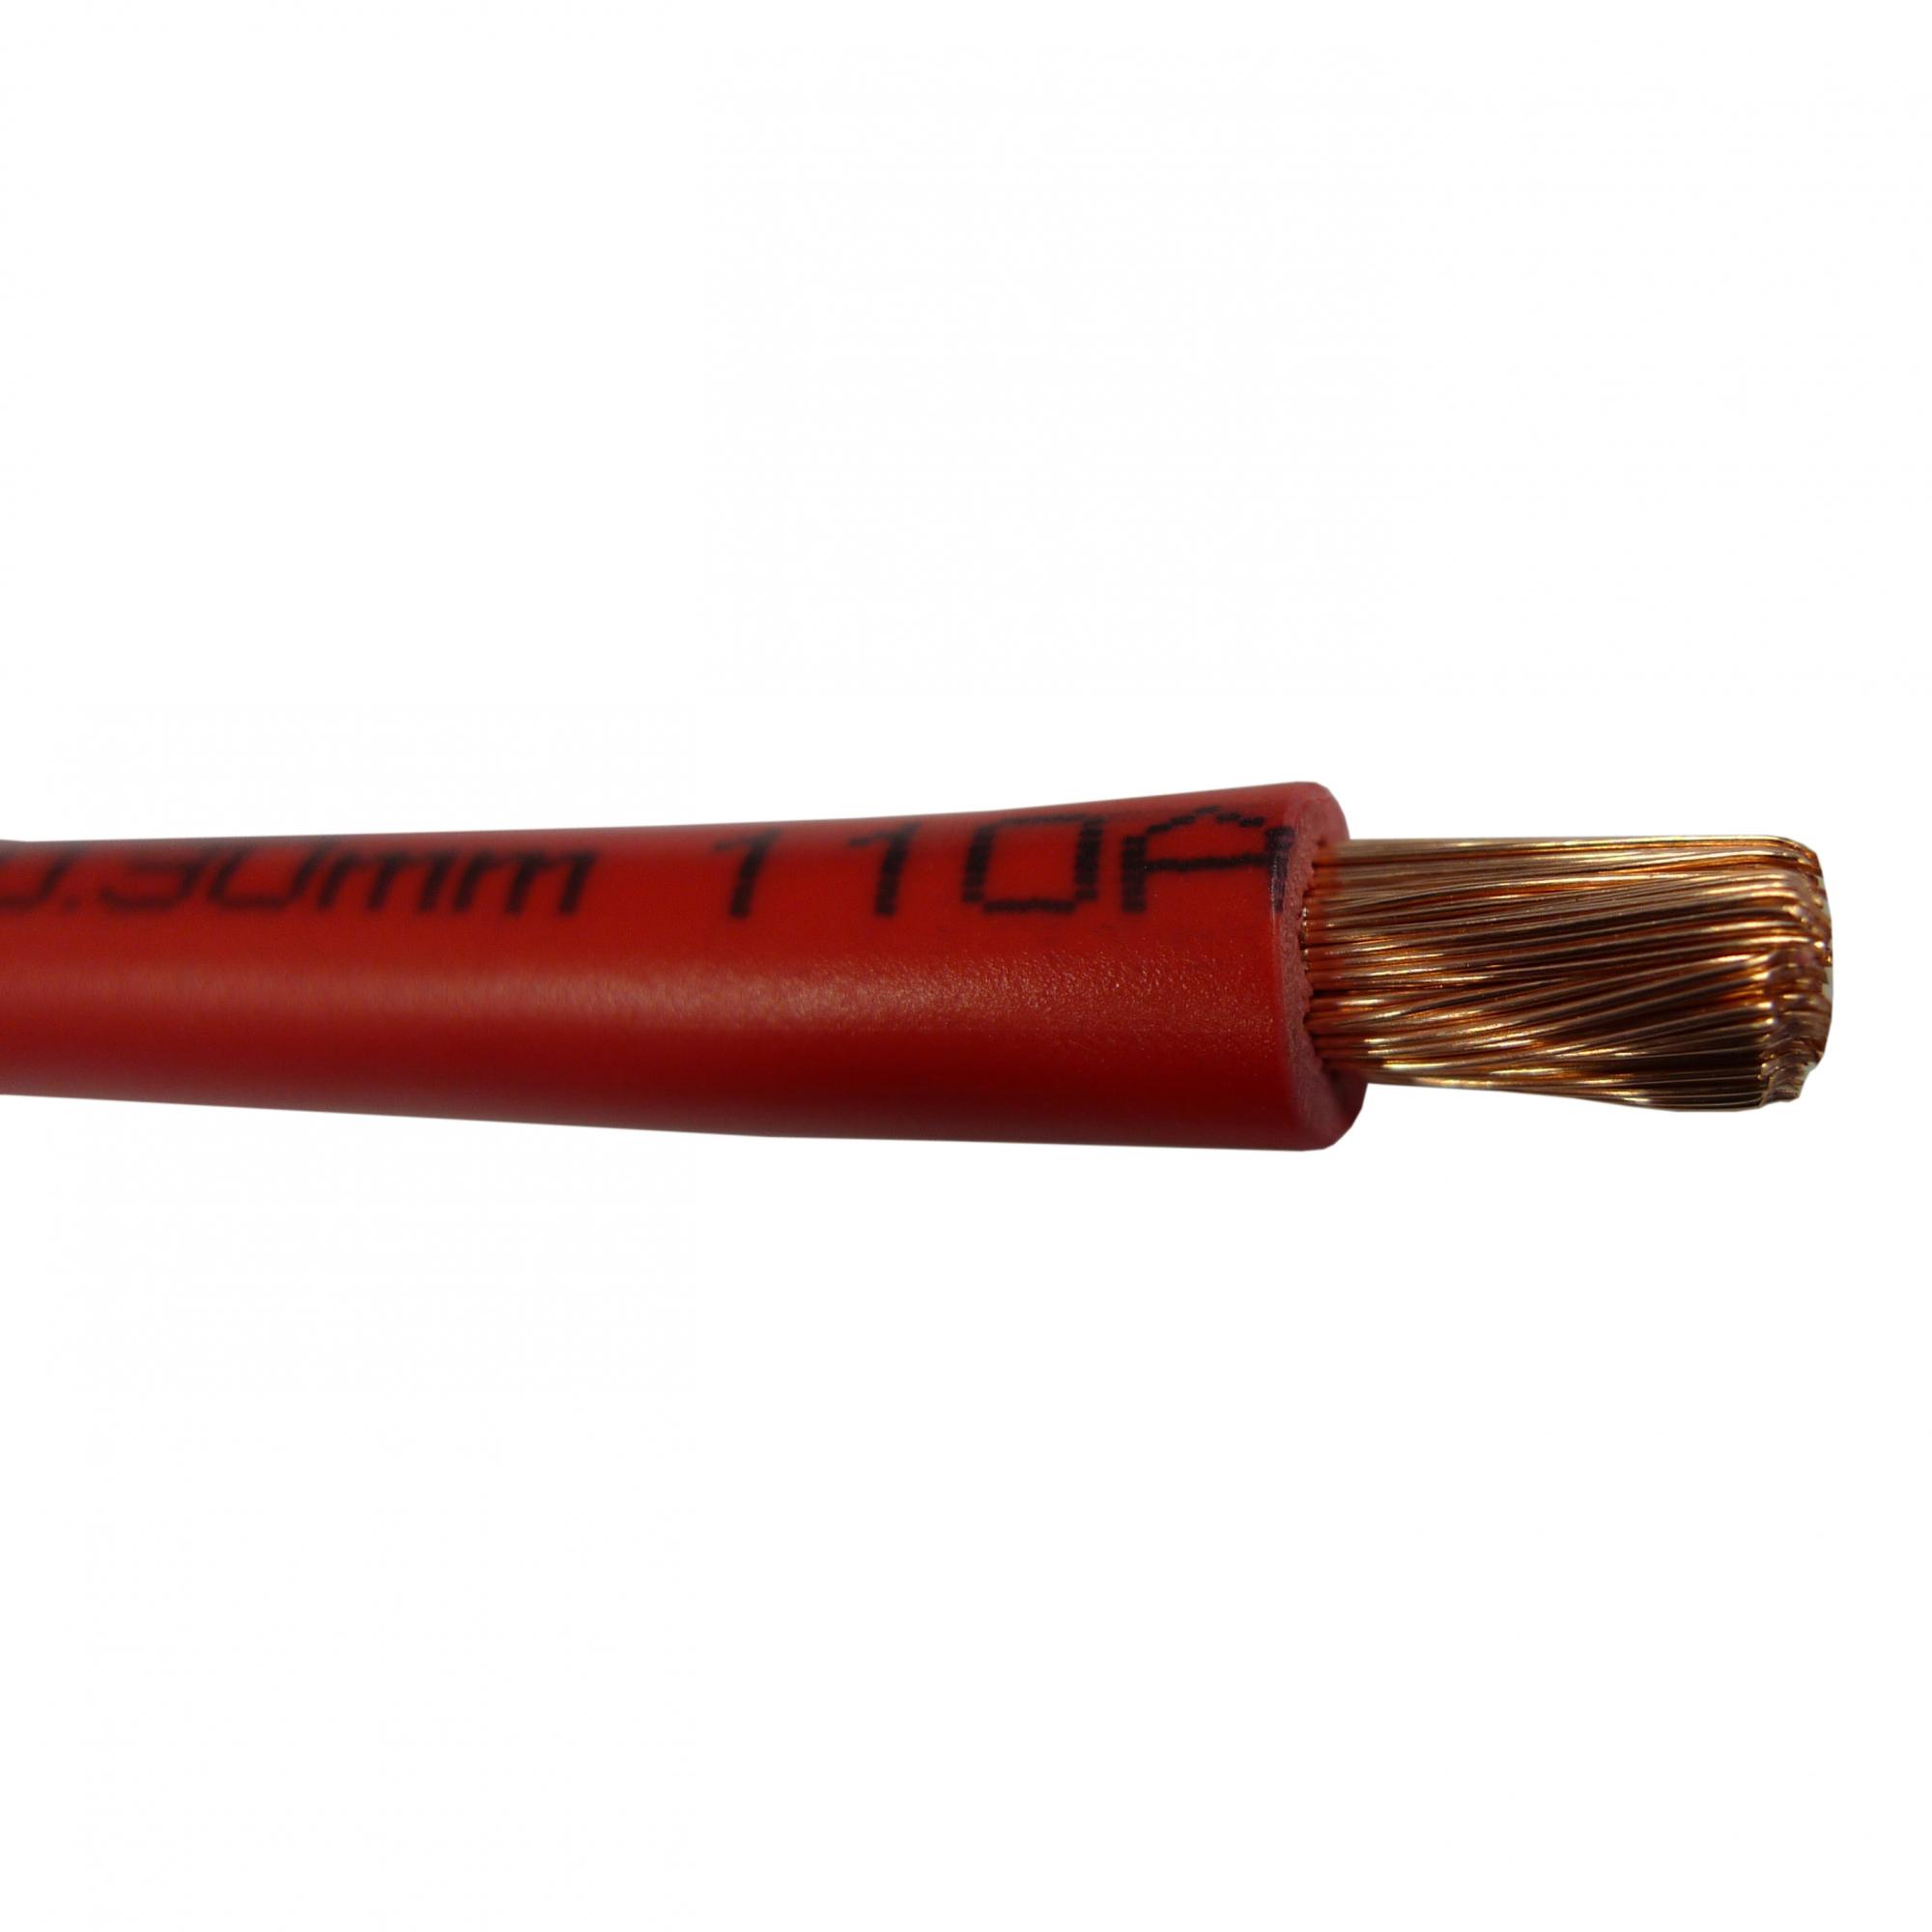 Battery Cable 15mm² Flexy Red (Per Metre)